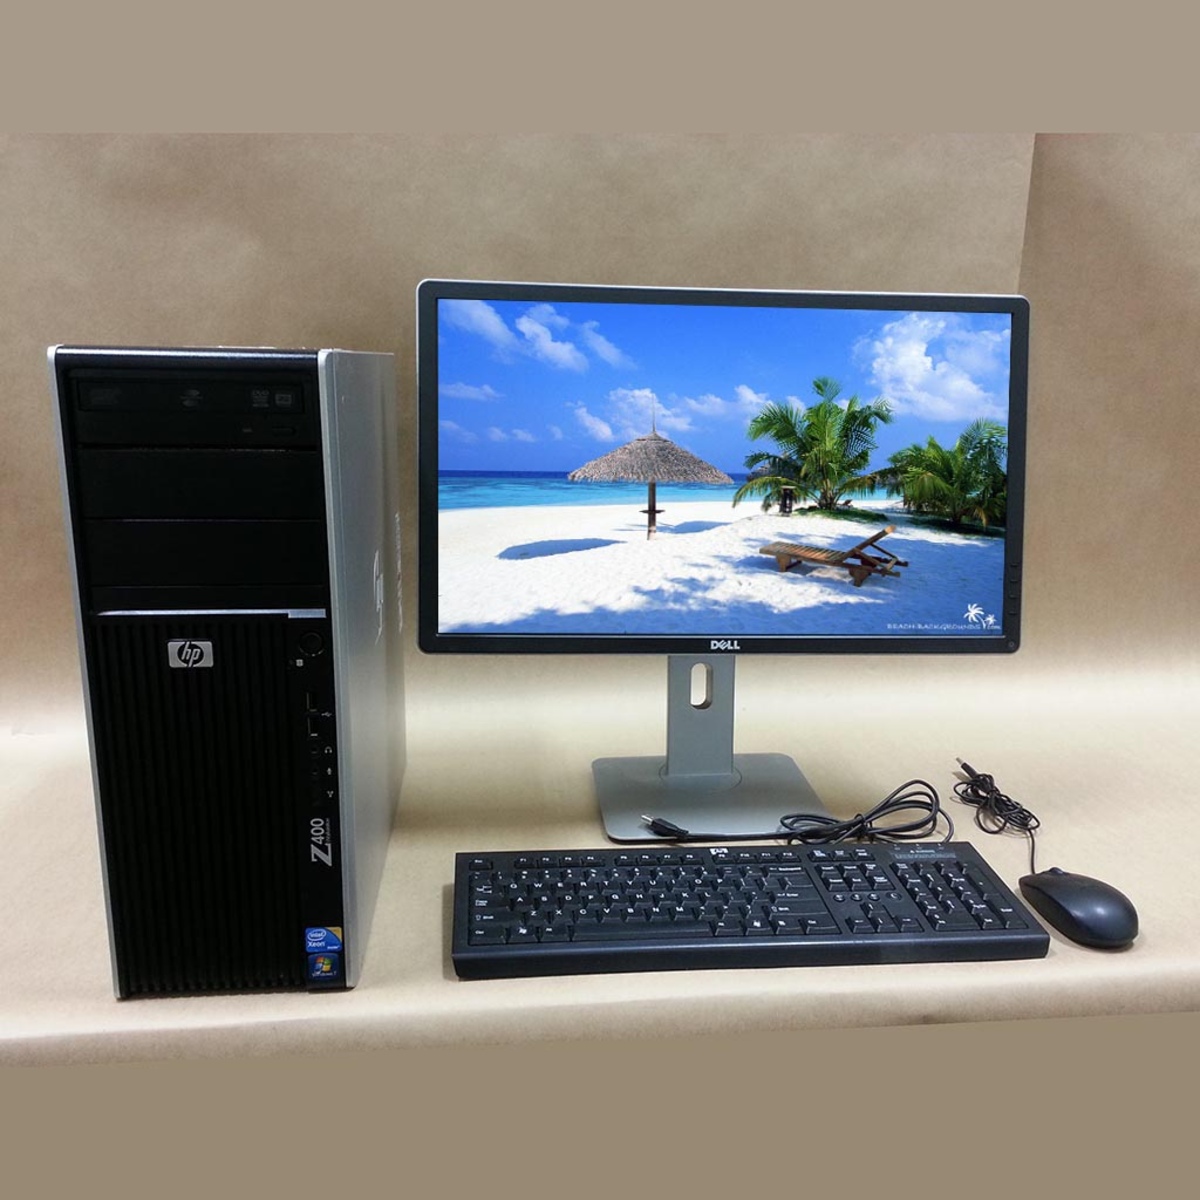 What Type Of Monitor Is Used With HP Z400 Workstation Review